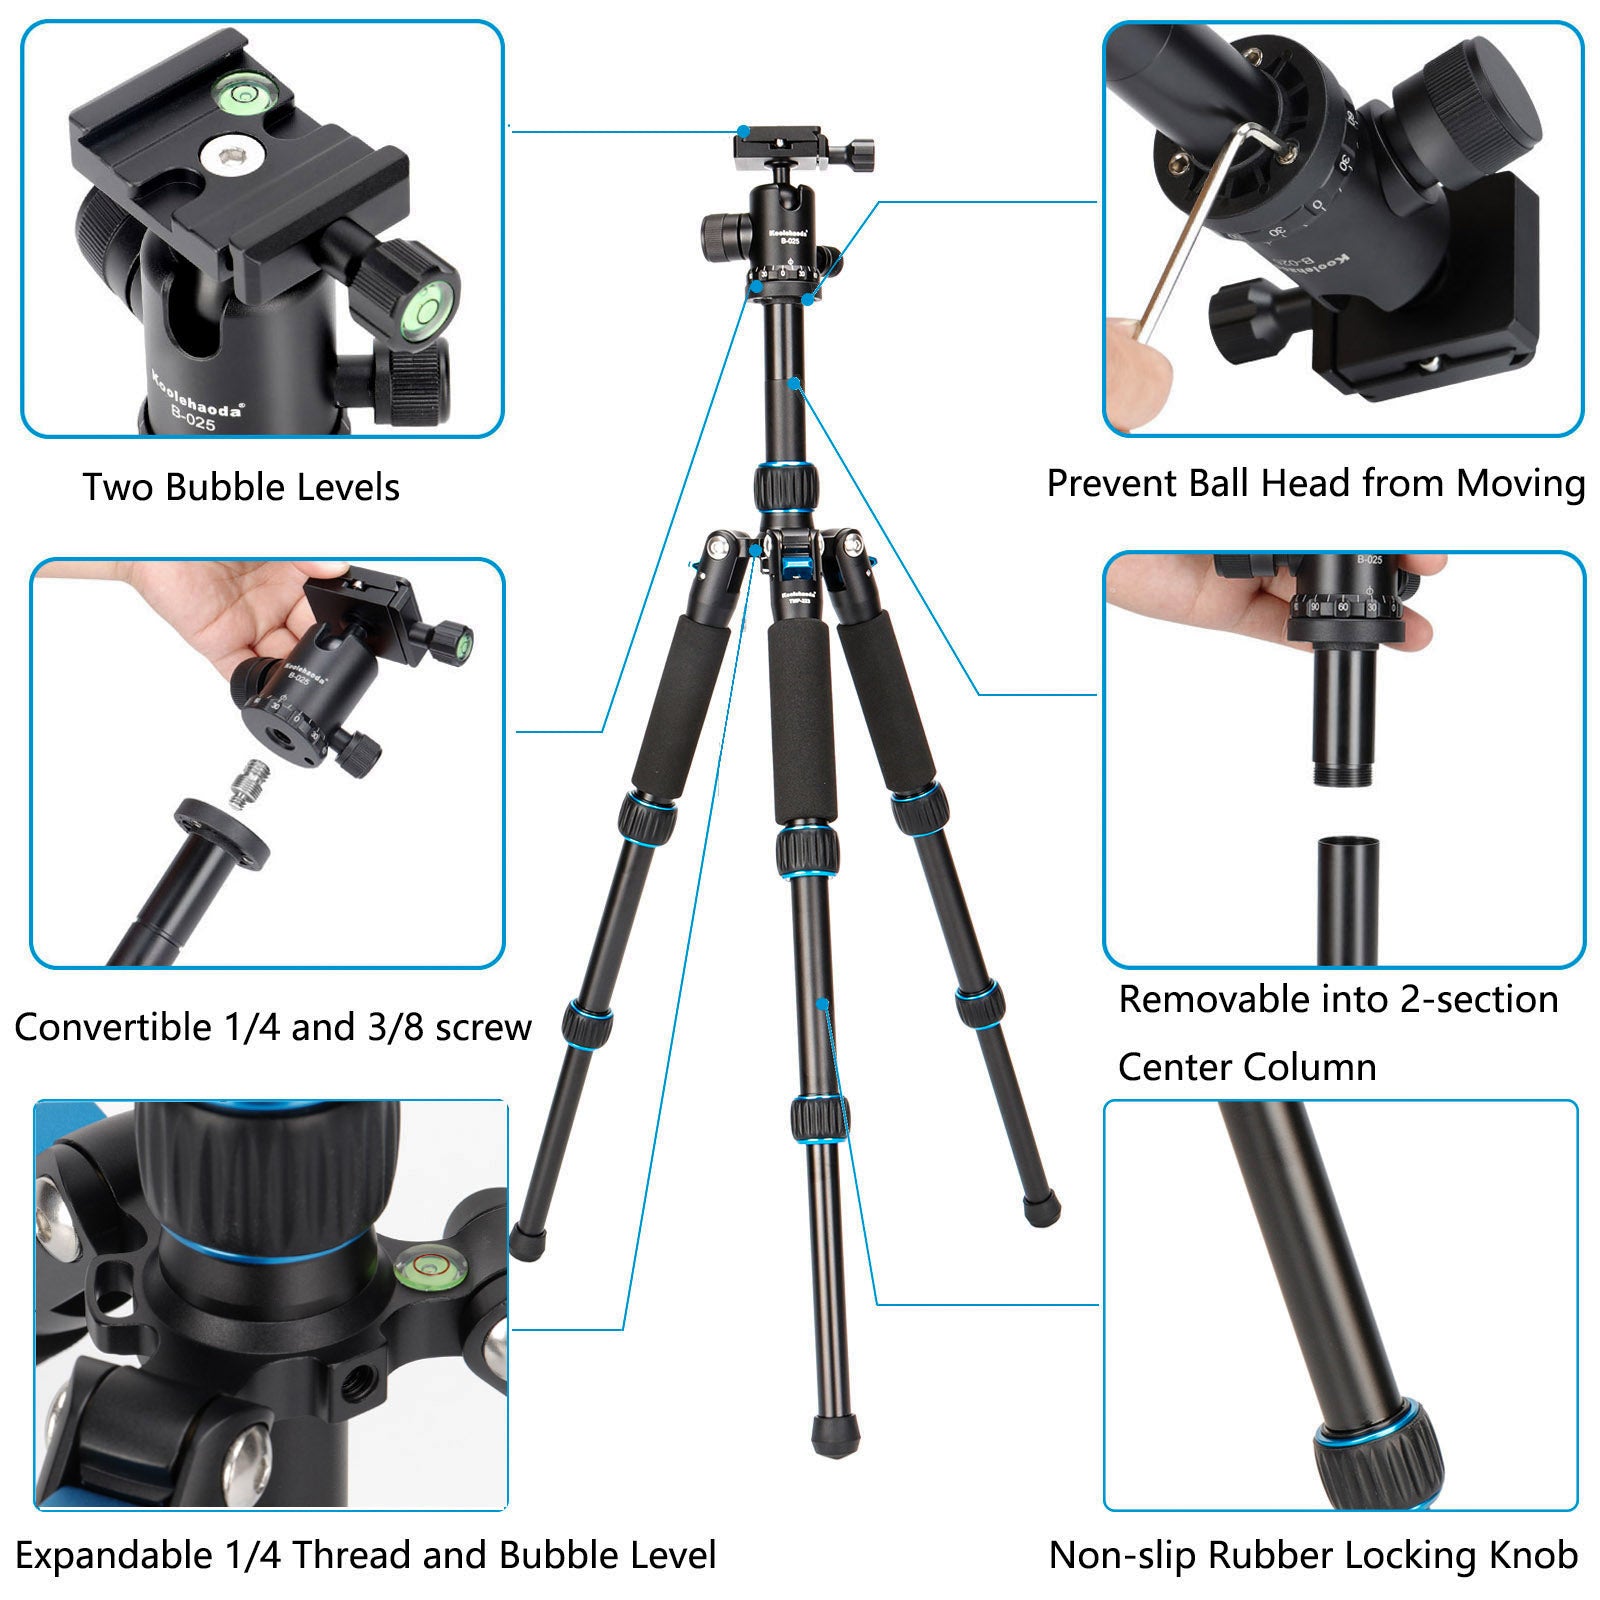 Koolehaoda Mini Tripod Aluminum Alloy Tabletop Tripod Height 21-63.5cm with Carrying Bag for DSLR Camera Video Camcorder, Load up to 22lbs /10kg - (TMP-223 Blue)